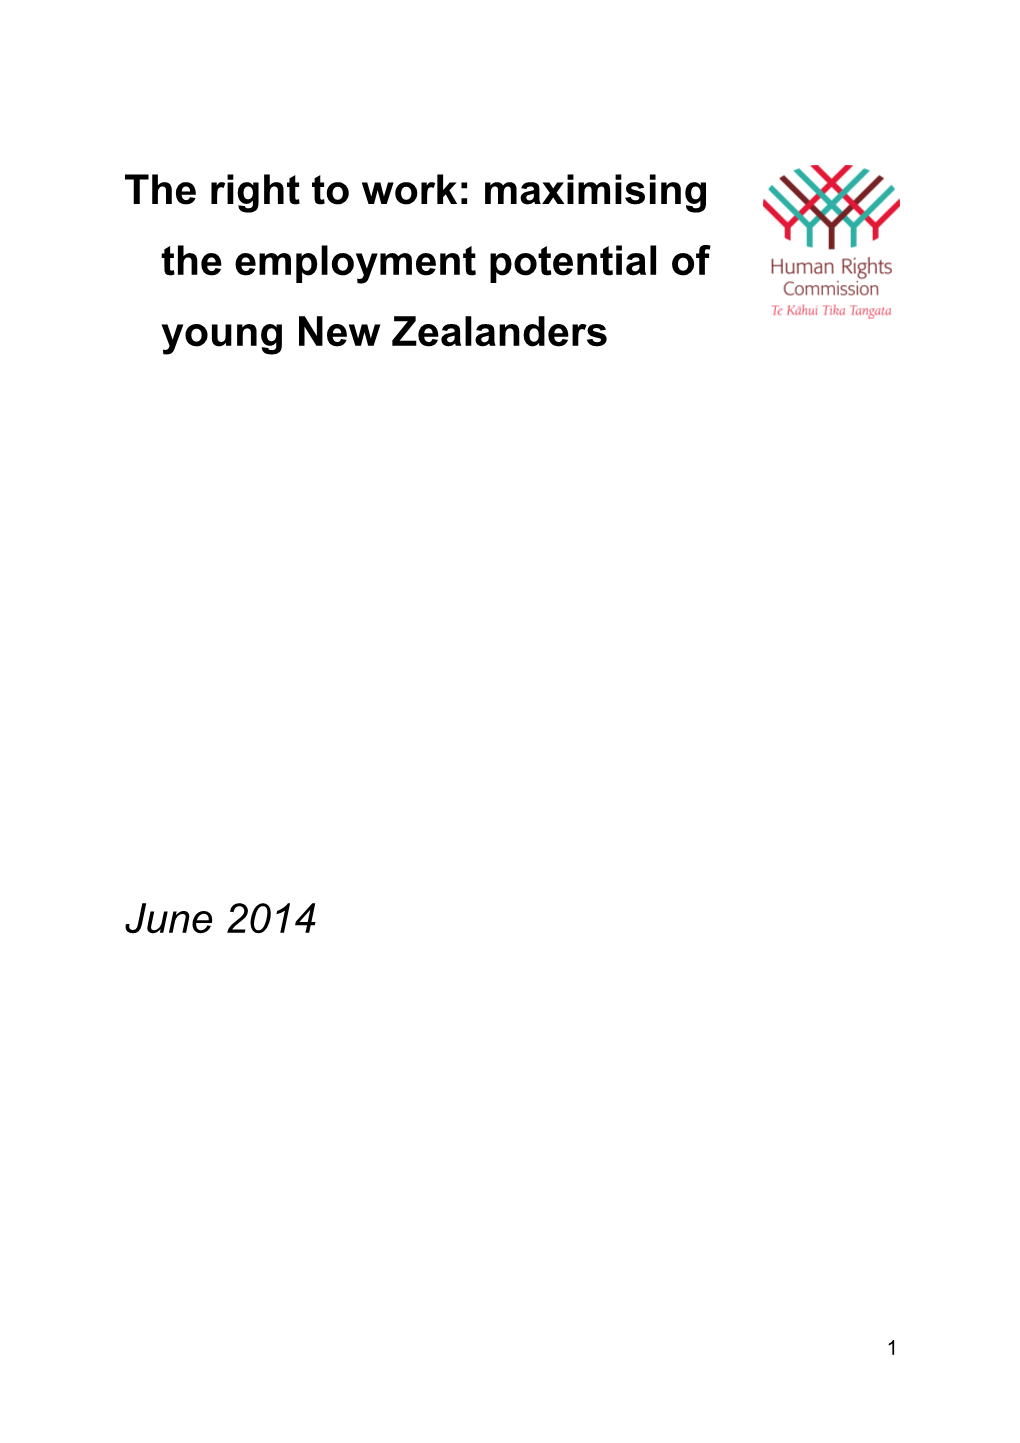 The Right to Work: Maximisingthe Employment Potential of Young New Zealanders